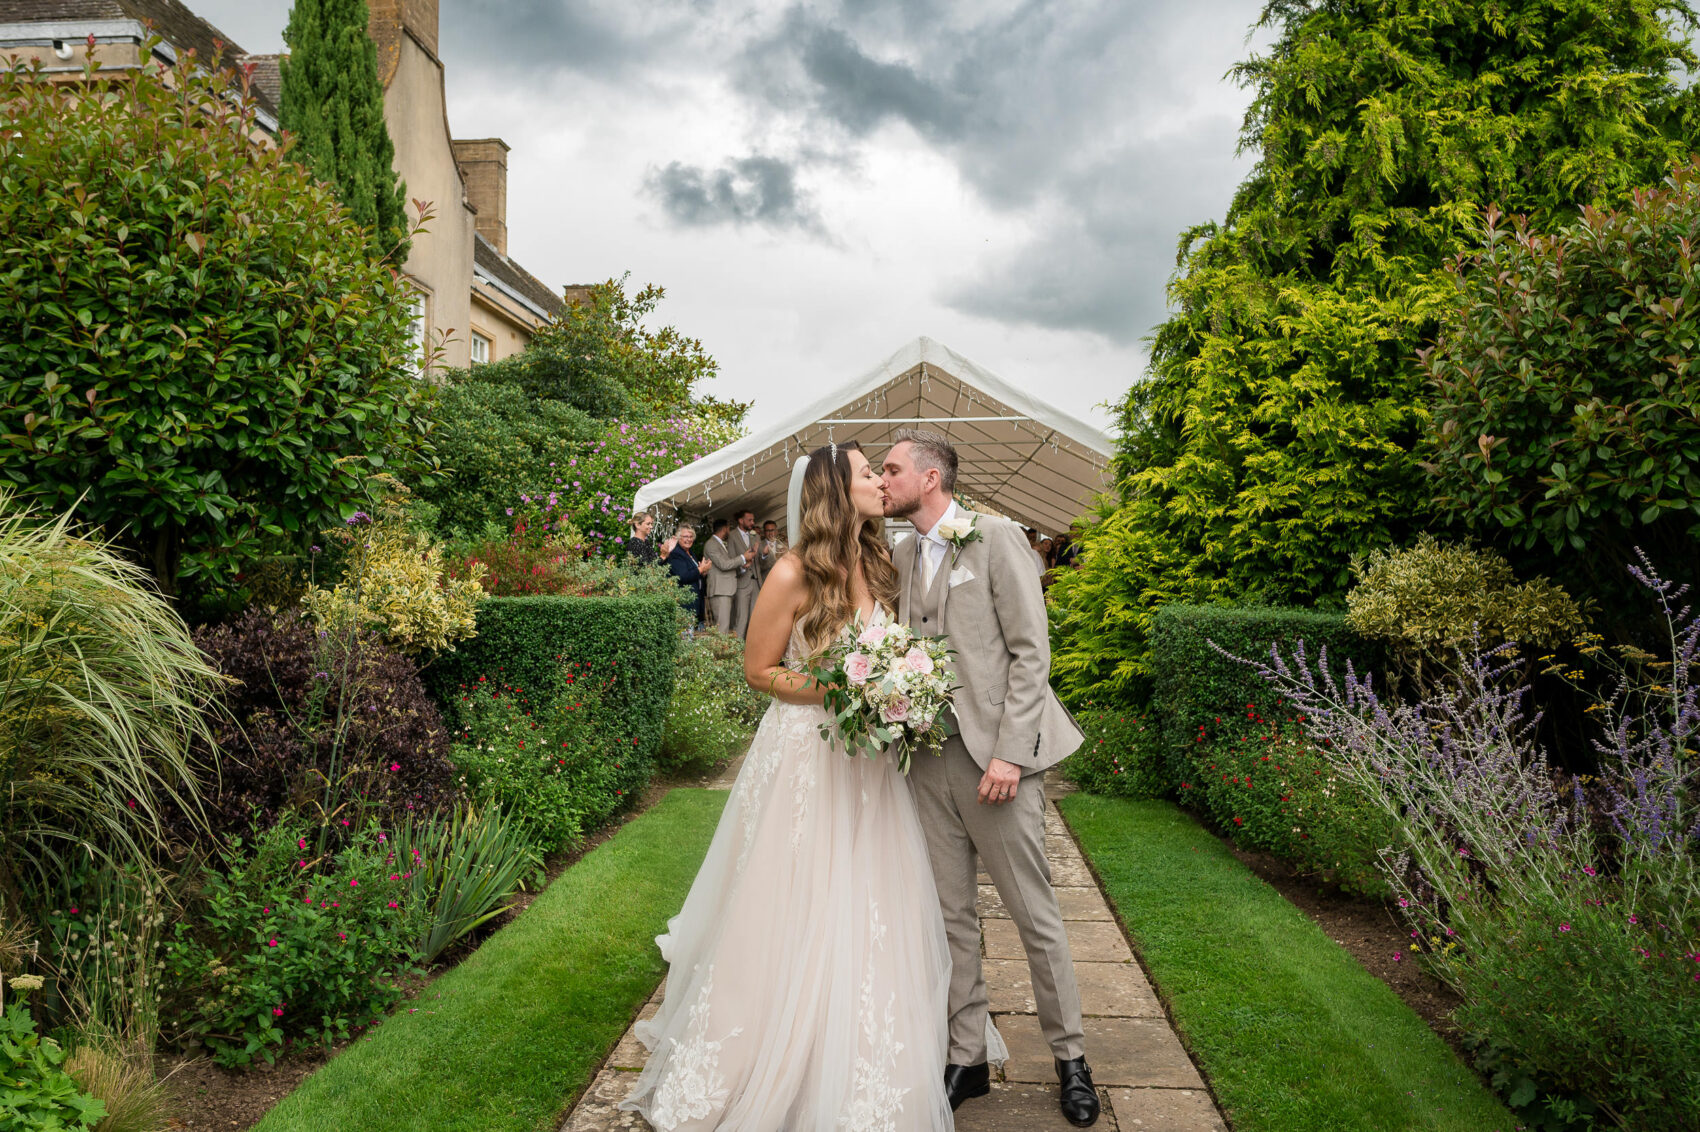 Brooding clouds after Hethfelton House wedding ceremony